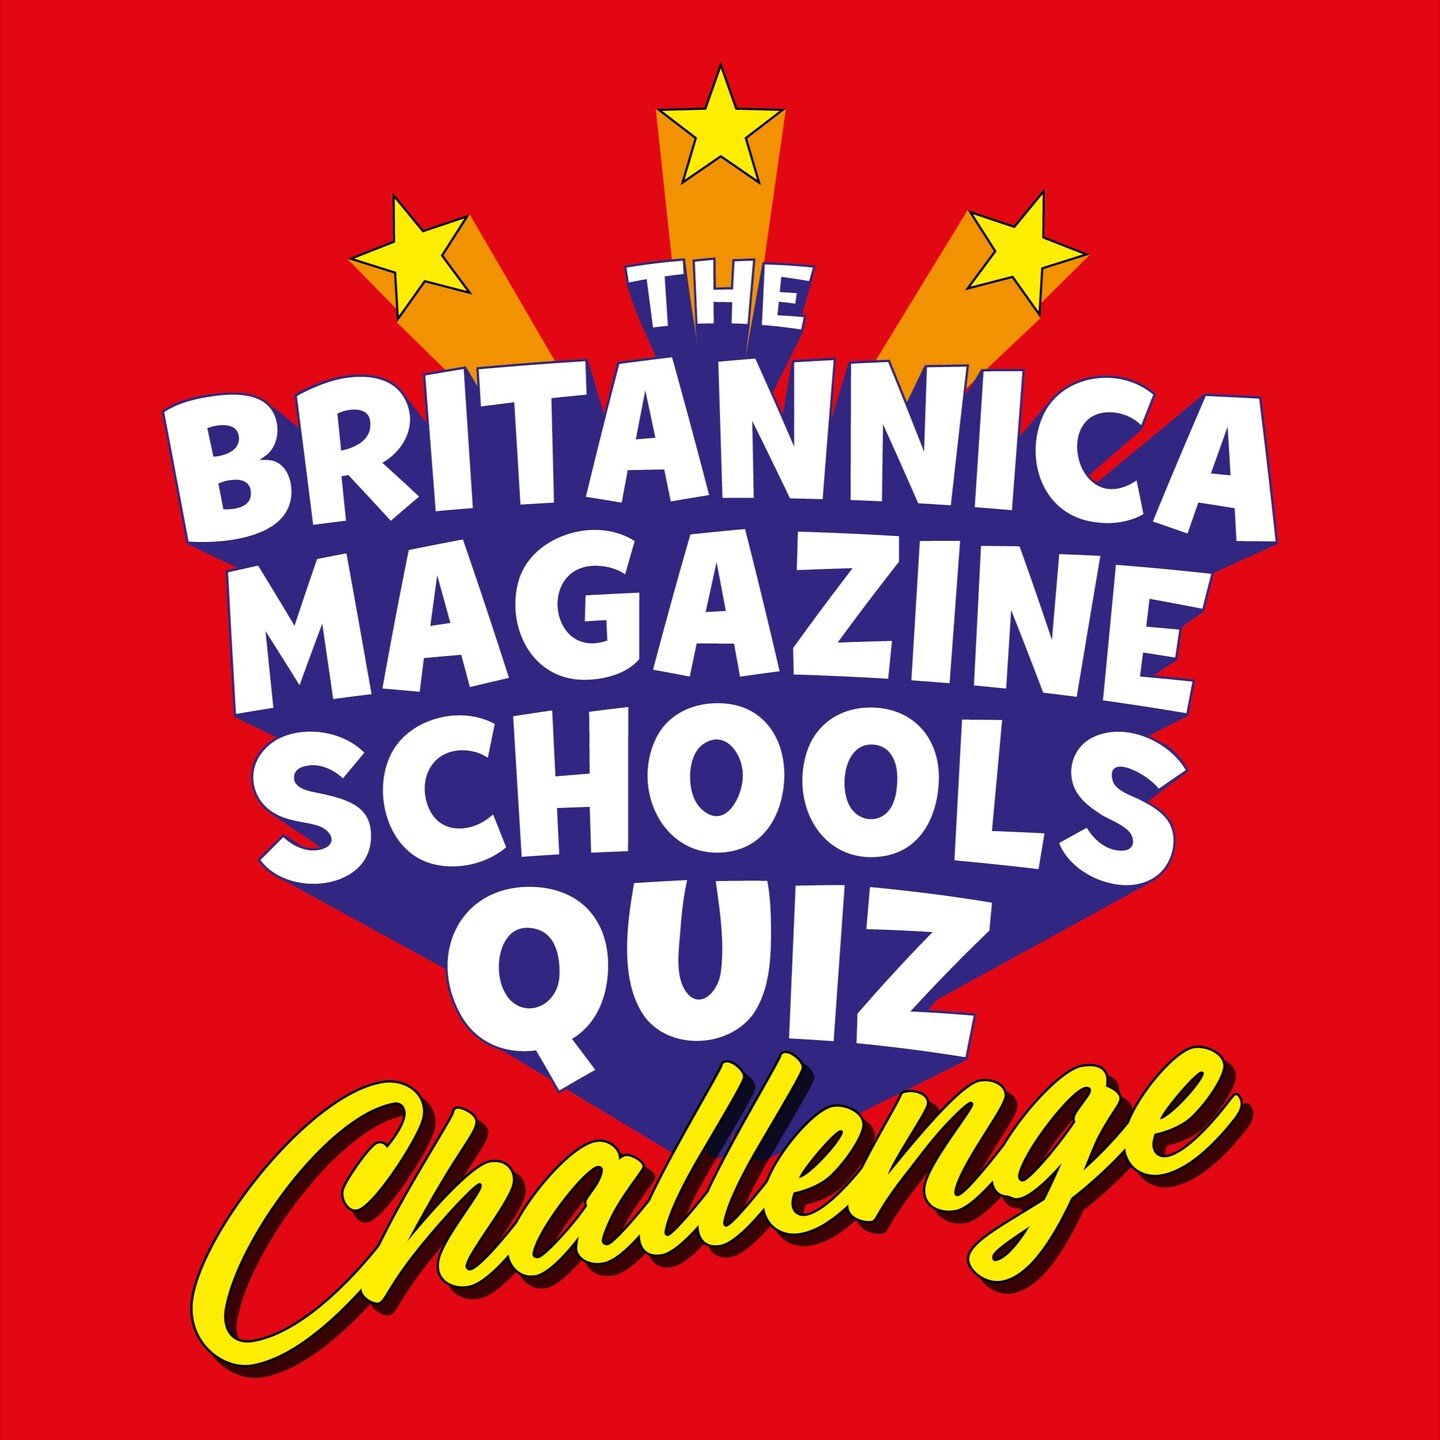 Good luck to the eight schools who&rsquo;ve made it to the finals of the first ever @britannicamagazine Schools Quiz Challenge. 🤞 

There&rsquo;ll be school quiz teams from Orkney, County Armagh, Northumberland, Gloucestershire, London, Kent and Cam